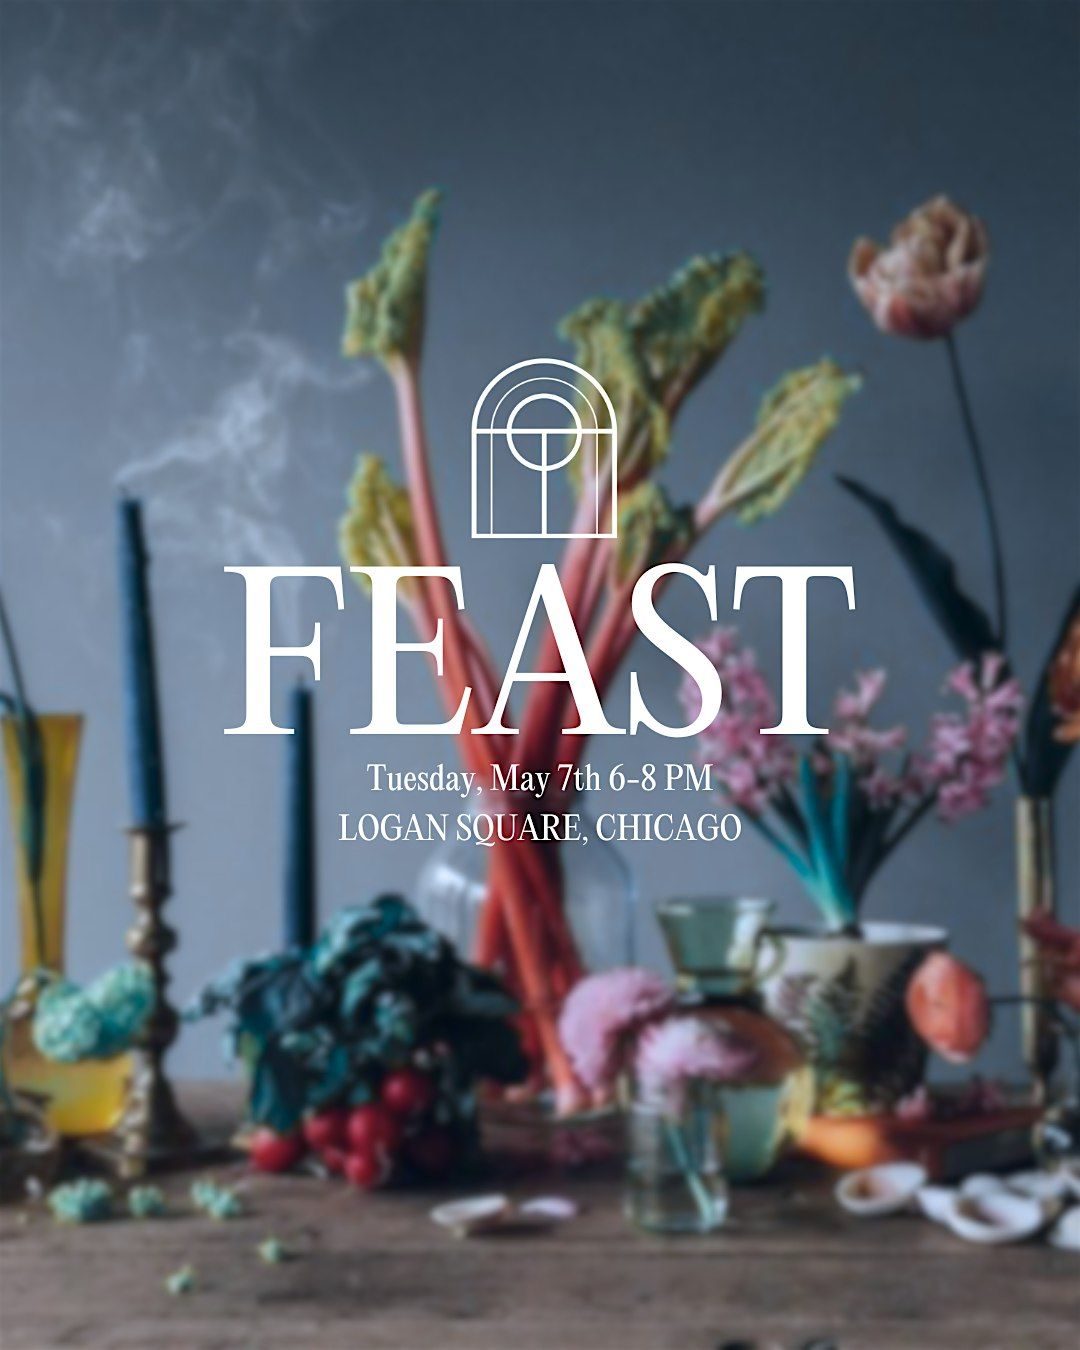 Quality Time Company Presents FEAST